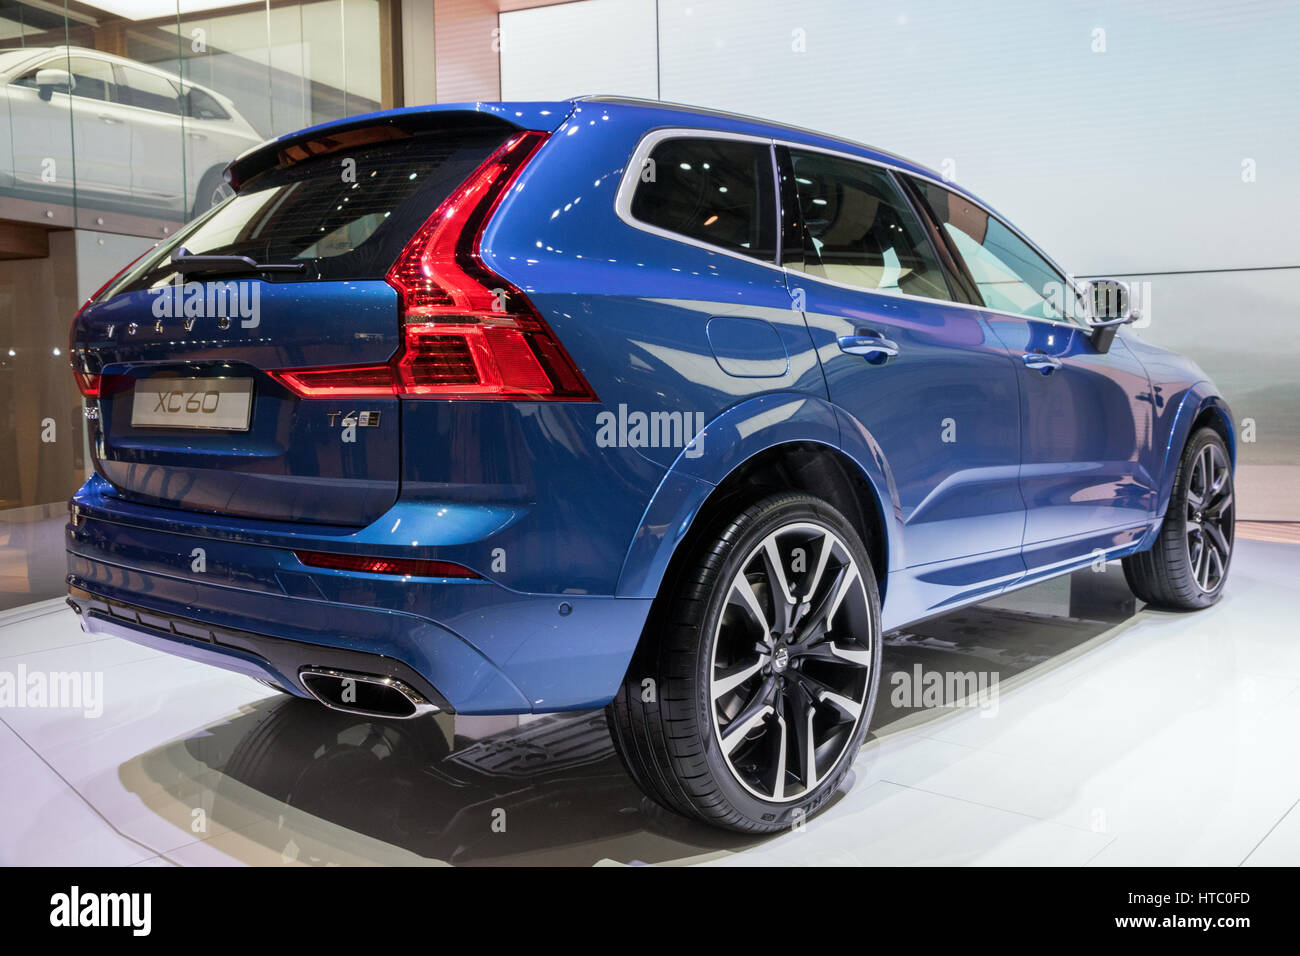 Volvo Xc 60 At Geneva High Resolution Stock Photography and Images - Alamy